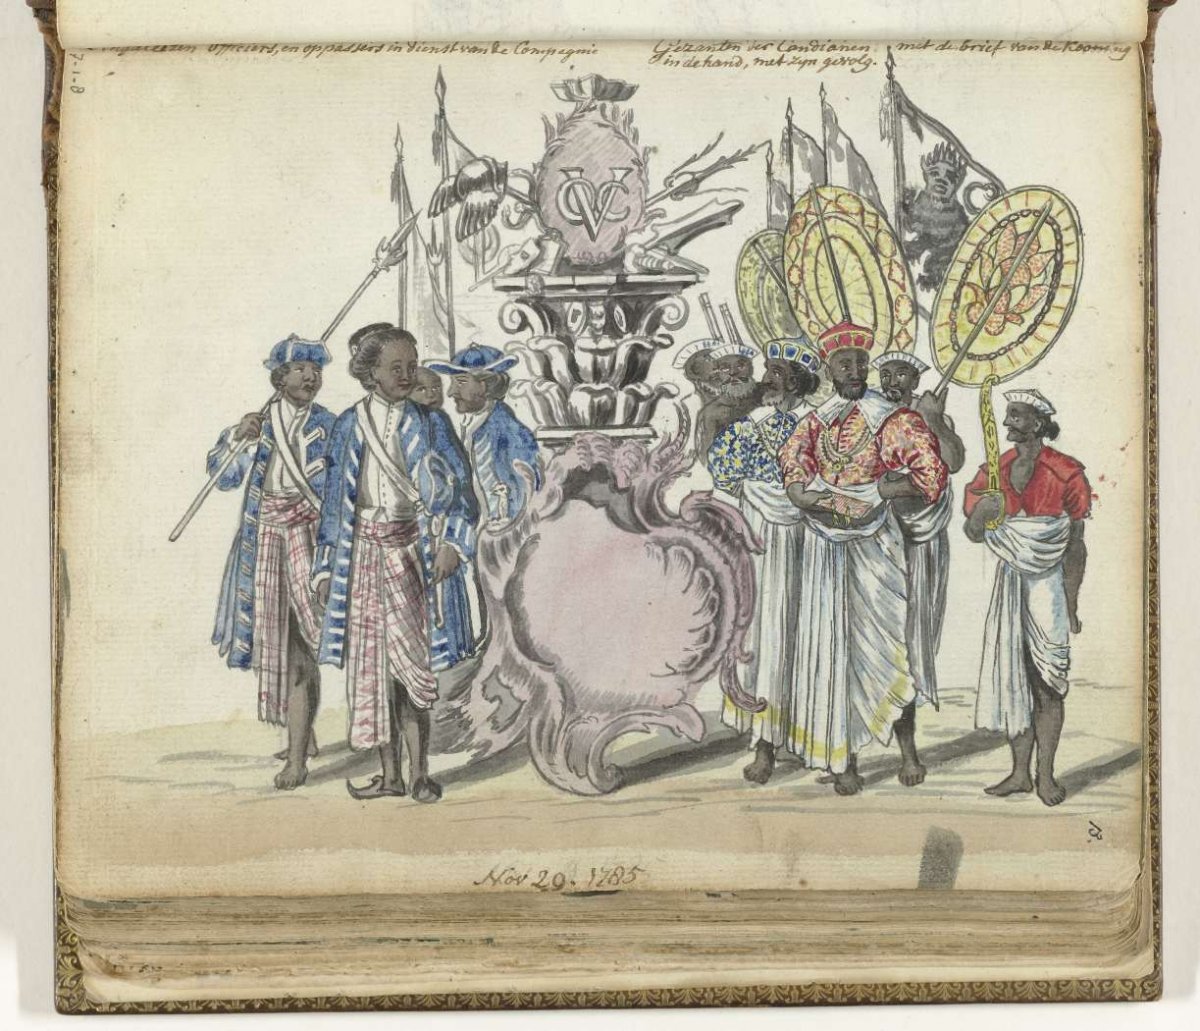 Sinhalese military in the service of the VOC and envoys of the king of Kandy, Jan Brandes, 1785